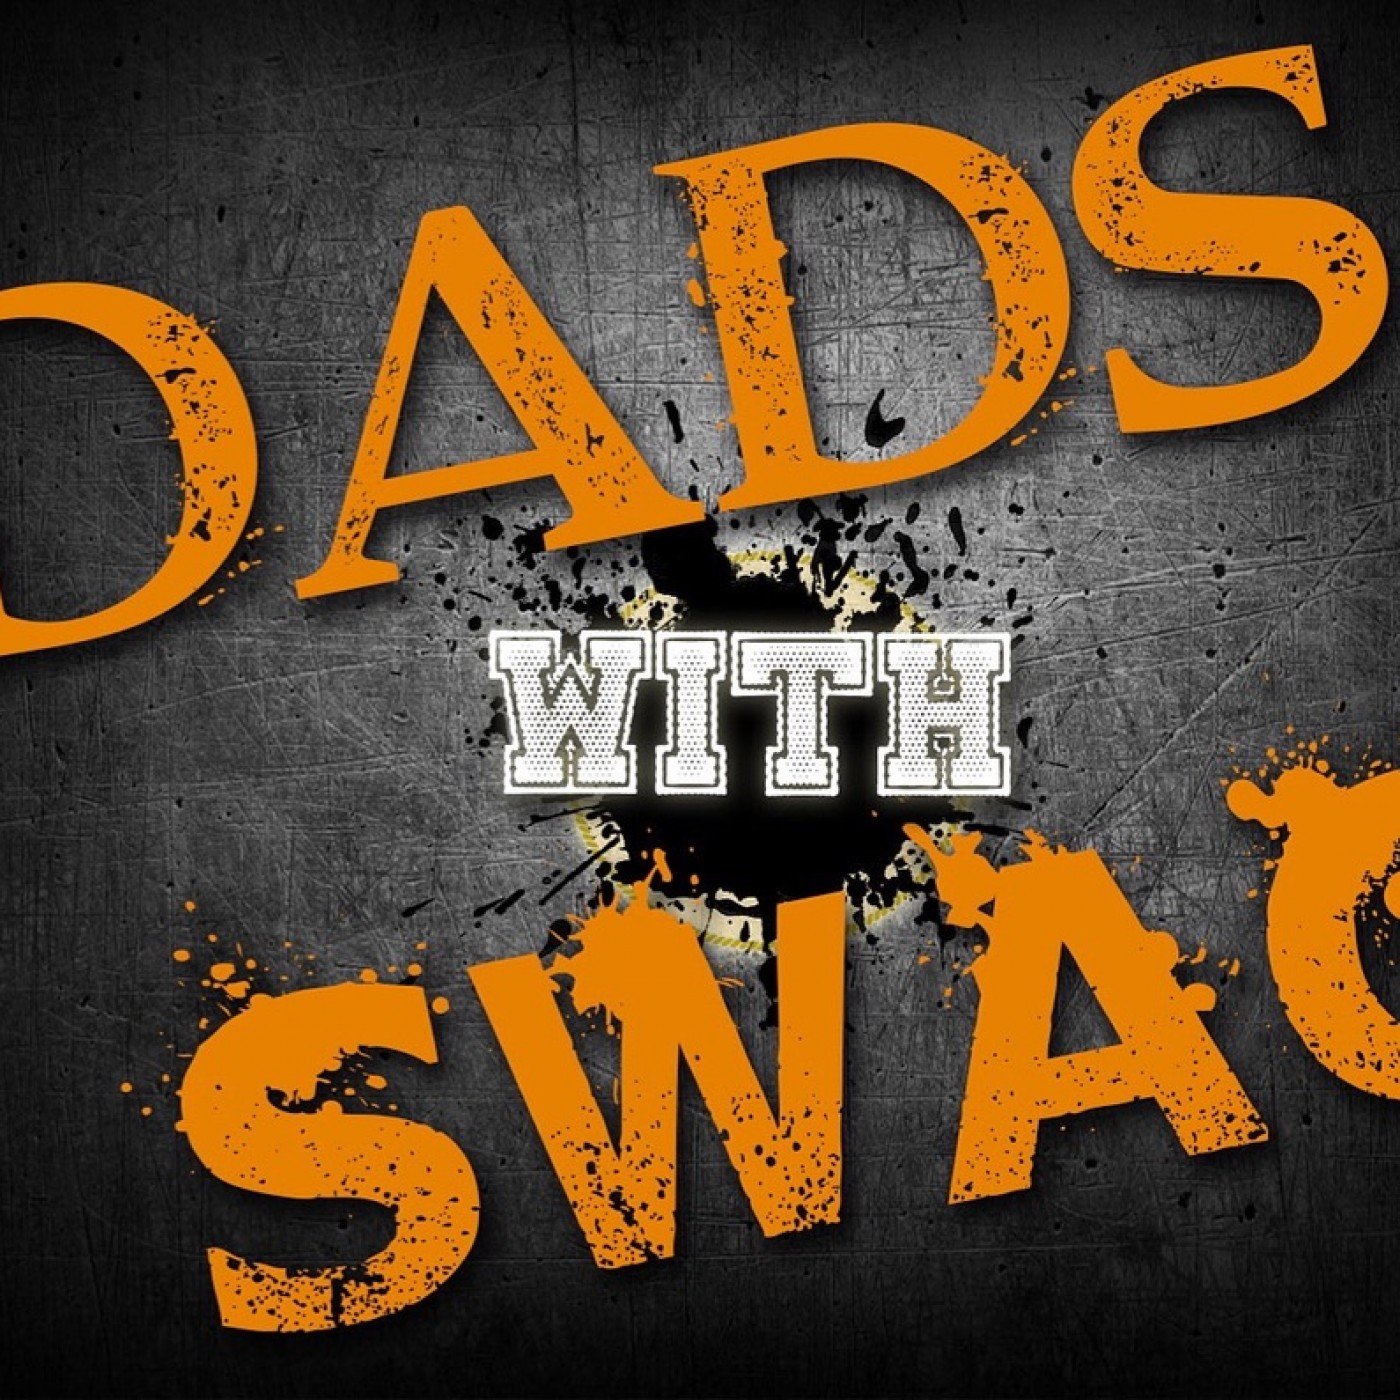 Dads With Swag